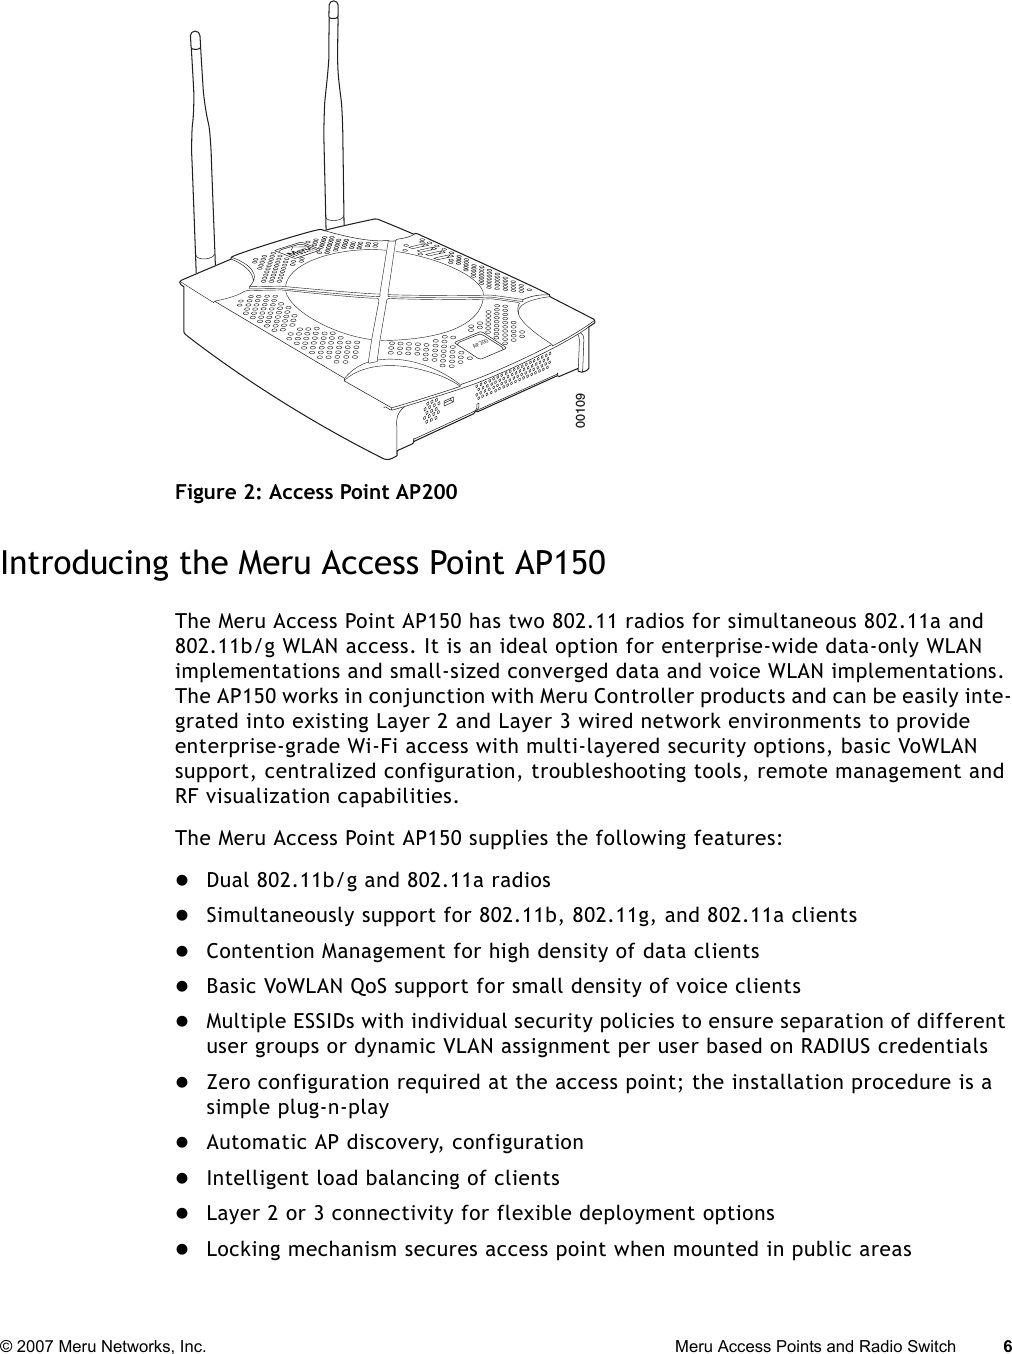 © 2007 Meru Networks, Inc. Meru Access Points and Radio Switch 6 Figure 2: Access Point AP200Introducing the Meru Access Point AP150The Meru Access Point AP150 has two 802.11 radios for simultaneous 802.11a and 802.11b/g WLAN access. It is an ideal option for enterprise-wide data-only WLAN implementations and small-sized converged data and voice WLAN implementations. The AP150 works in conjunction with Meru Controller products and can be easily inte-grated into existing Layer 2 and Layer 3 wired network environments to provide enterprise-grade Wi-Fi access with multi-layered security options, basic VoWLAN support, centralized configuration, troubleshooting tools, remote management and RF visualization capabilities. The Meru Access Point AP150 supplies the following features:zDual 802.11b/g and 802.11a radioszSimultaneously support for 802.11b, 802.11g, and 802.11a clientszContention Management for high density of data clientszBasic VoWLAN QoS support for small density of voice clientszMultiple ESSIDs with individual security policies to ensure separation of different user groups or dynamic VLAN assignment per user based on RADIUS credentialszZero configuration required at the access point; the installation procedure is a simple plug-n-playzAutomatic AP discovery, configurationzIntelligent load balancing of clientszLayer 2 or 3 connectivity for flexible deployment optionszLocking mechanism secures access point when mounted in public areasAP20000109